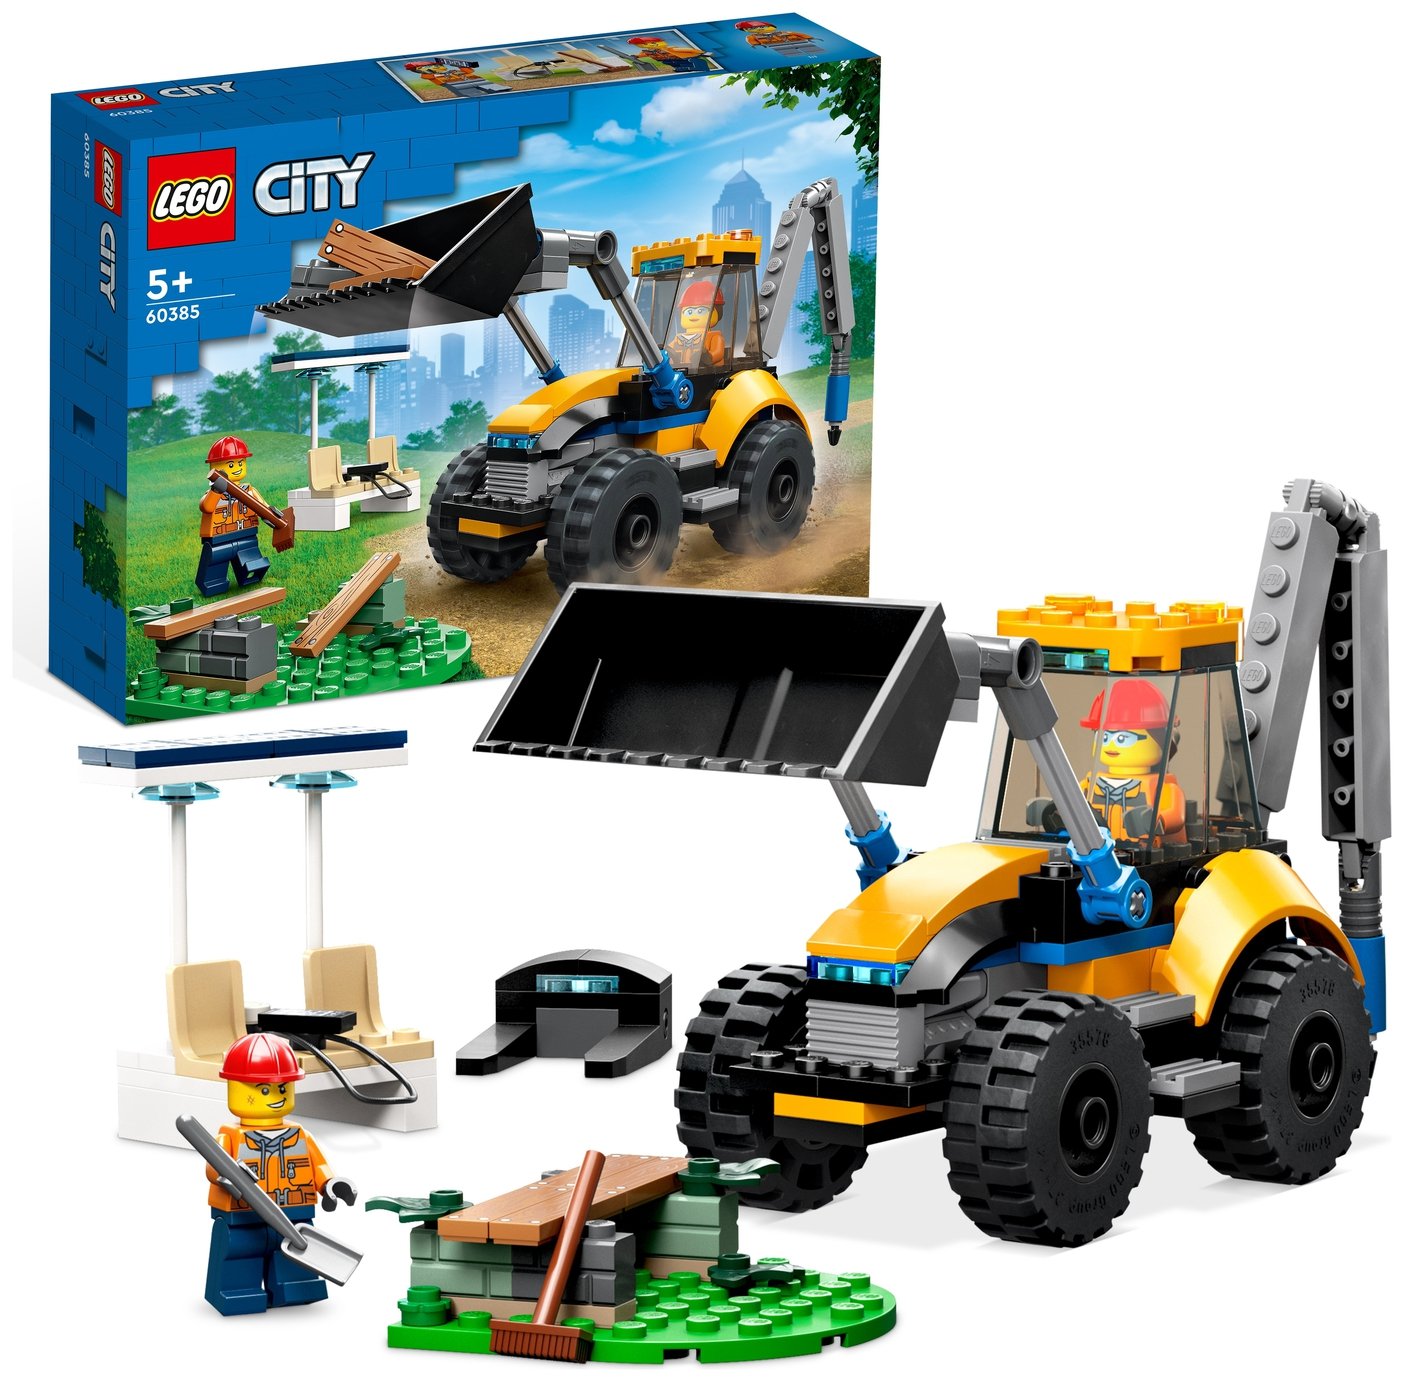 LEGO City Construction Digger, Excavator Vehicle Toy 60385 review